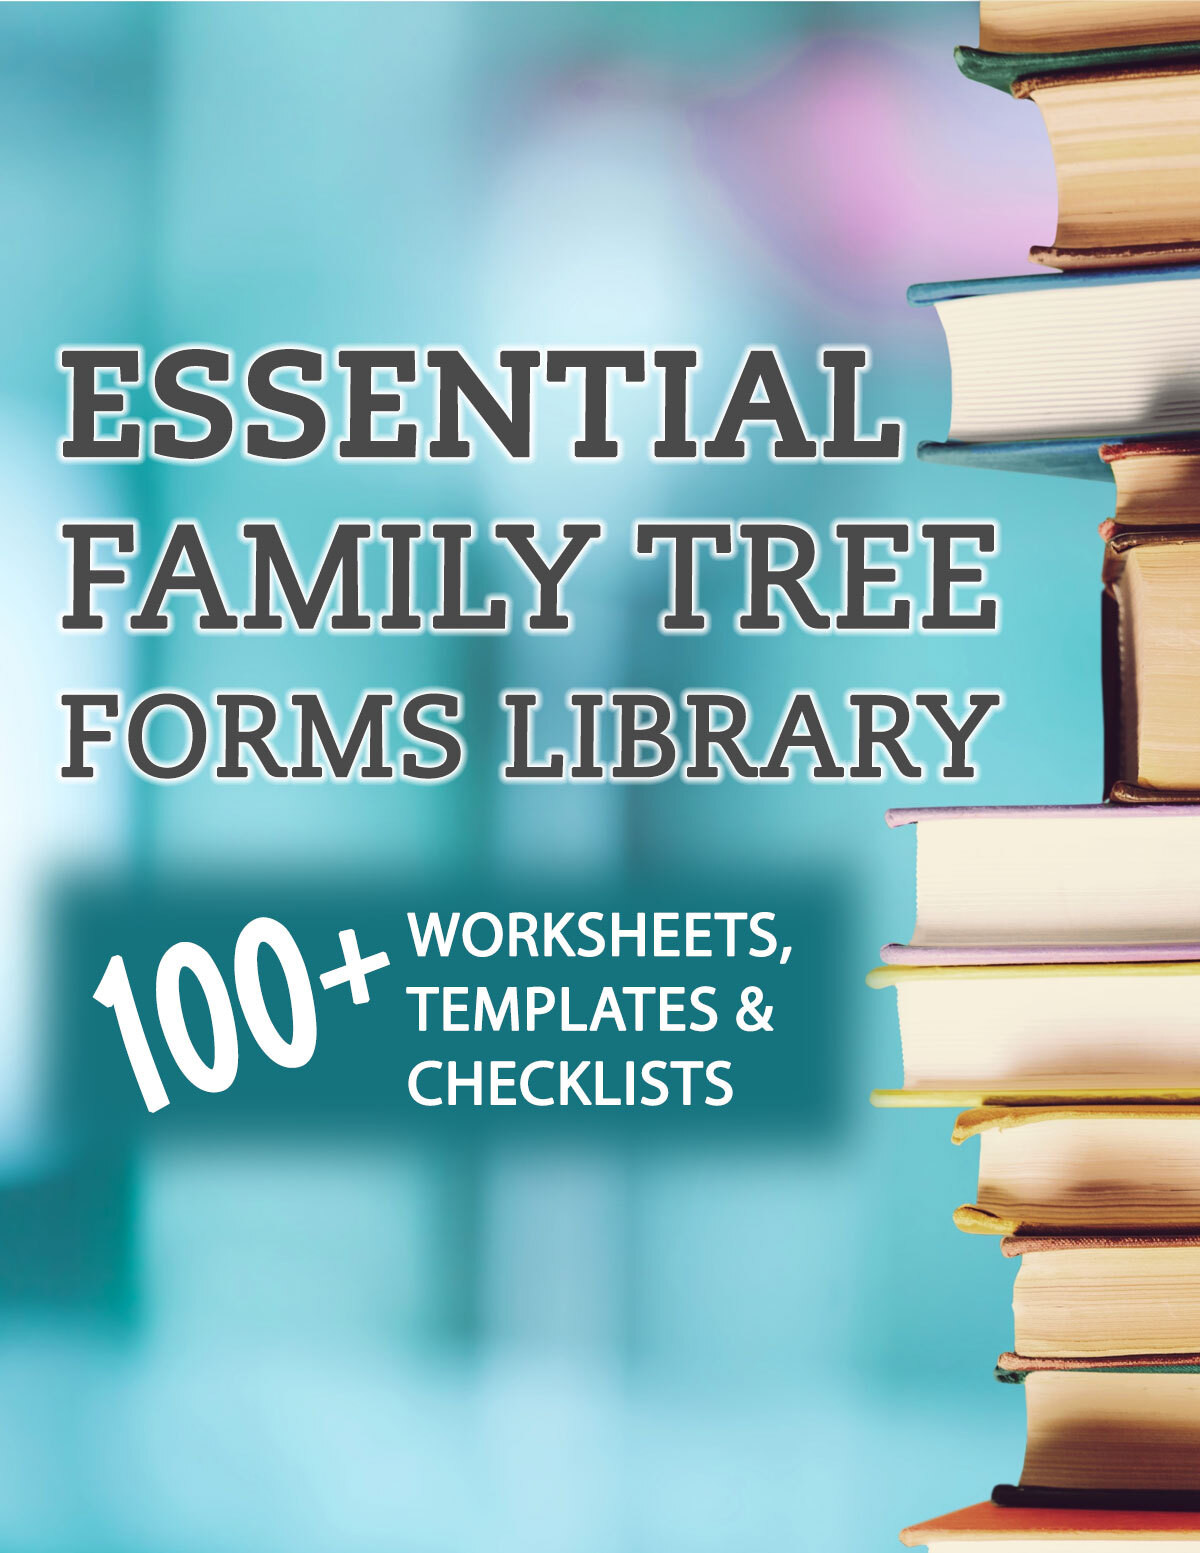 Essential Family Tree Forms Library: 100+ Worksheets, Templates & Checklists